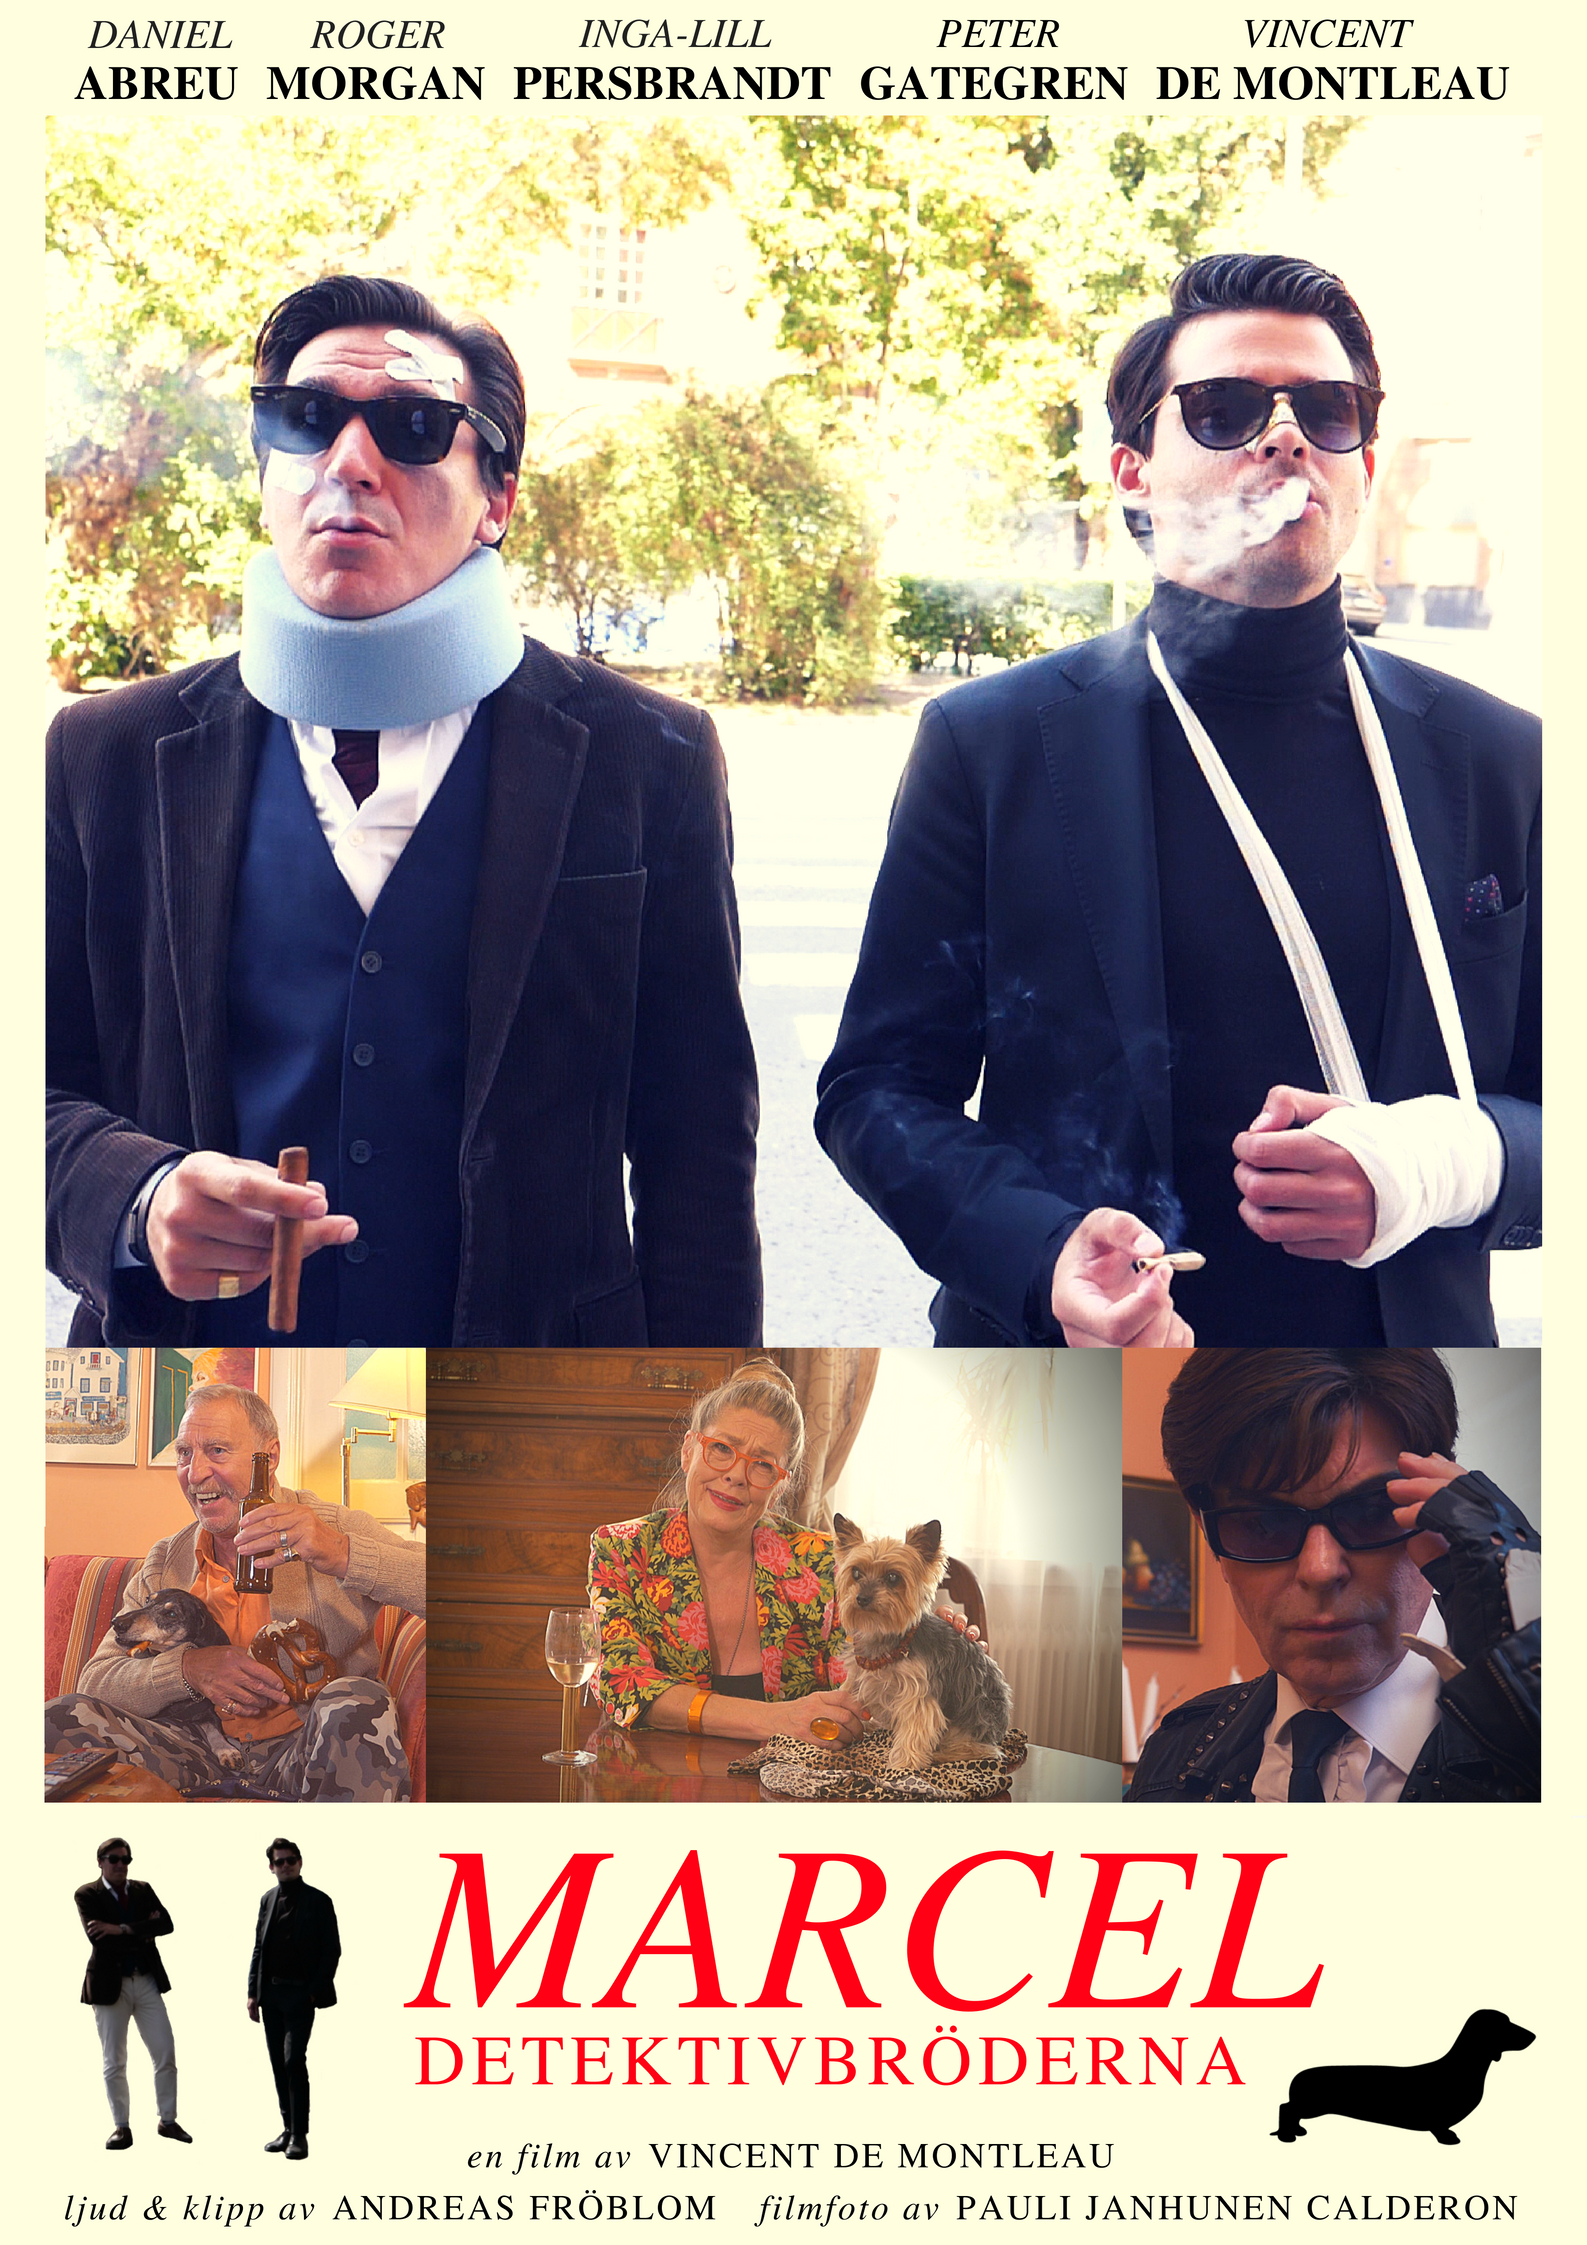 Marcel - The Detective Brothers